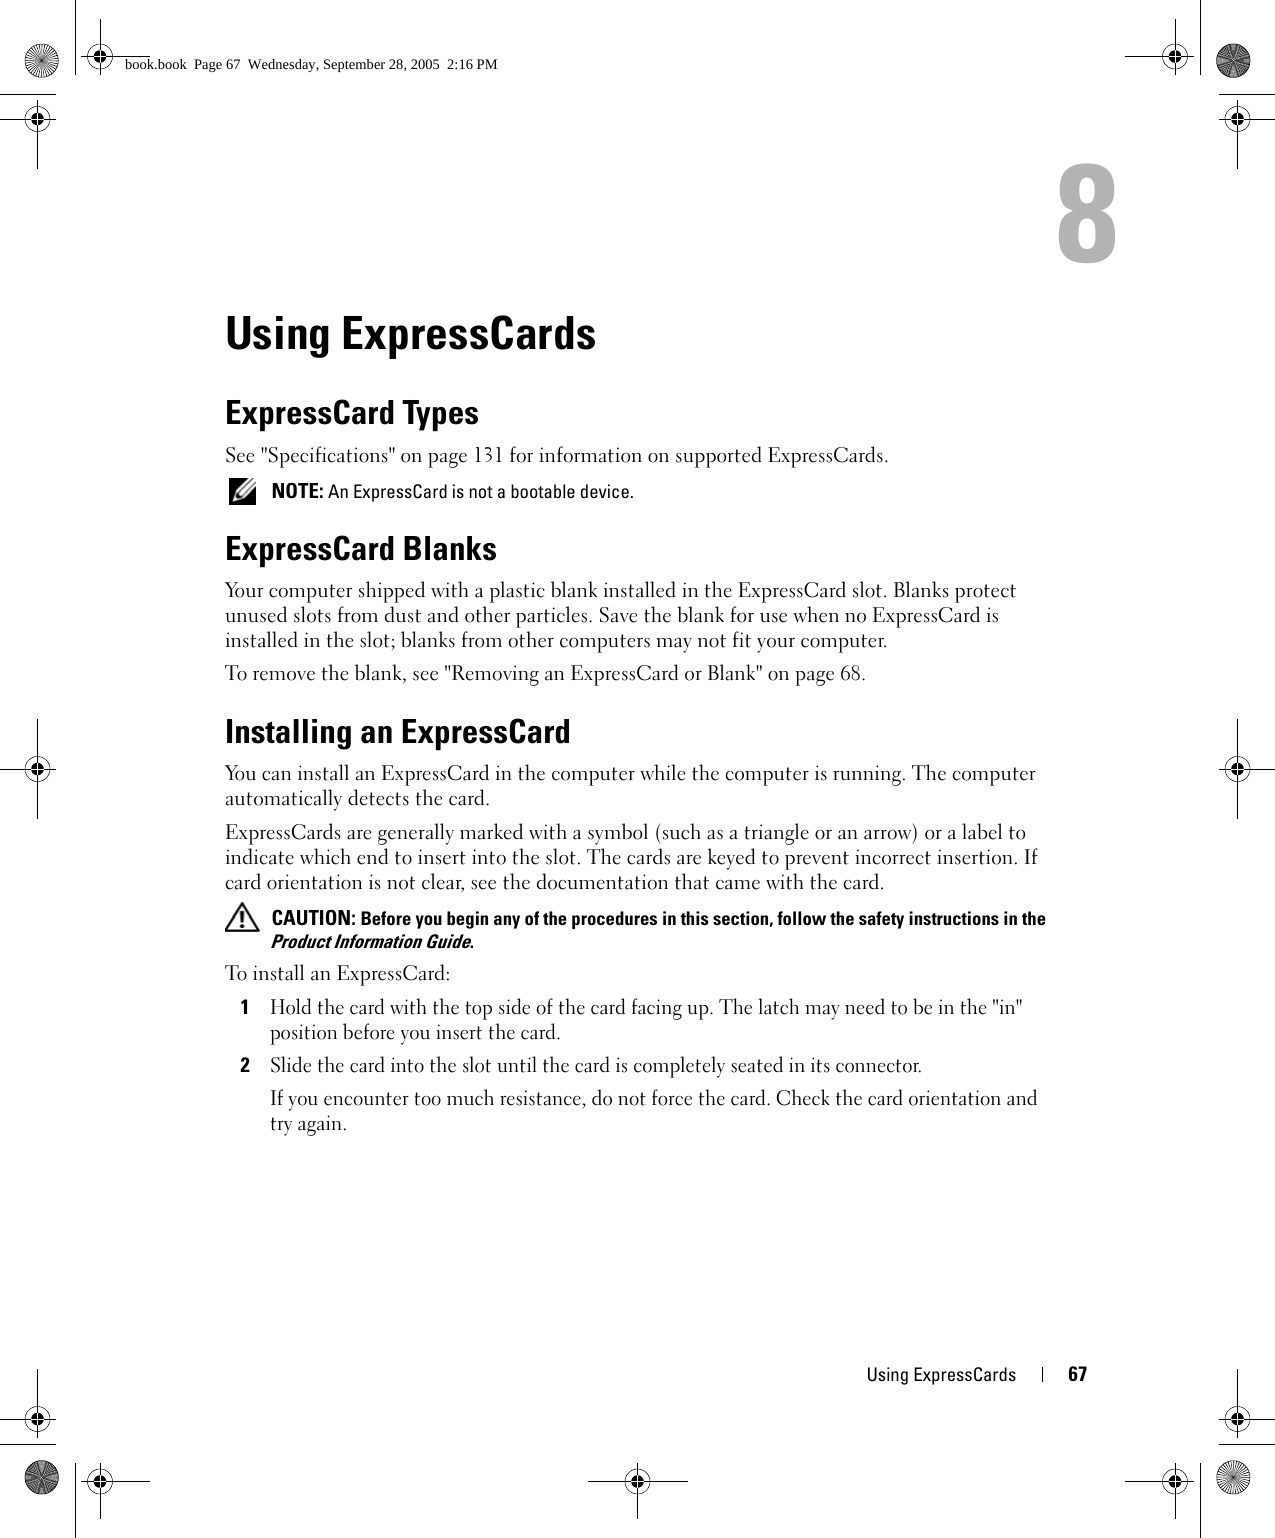 Using ExpressCards 678Using ExpressCardsExpressCard TypesSee &quot;Specifications&quot; on page 131 for information on supported ExpressCards. NOTE: An ExpressCard is not a bootable device.ExpressCard BlanksYour computer shipped with a plastic blank installed in the ExpressCard slot. Blanks protect unused slots from dust and other particles. Save the blank for use when no ExpressCard is installed in the slot; blanks from other computers may not fit your computer.To remove the blank, see &quot;Removing an ExpressCard or Blank&quot; on page 68.Installing an ExpressCardYou can install an ExpressCard in the computer while the computer is running. The computer automatically detects the card.ExpressCards are generally marked with a symbol (such as a triangle or an arrow) or a label to indicate which end to insert into the slot. The cards are keyed to prevent incorrect insertion. If card orientation is not clear, see the documentation that came with the card.  CAUTION: Before you begin any of the procedures in this section, follow the safety instructions in the Product Information Guide.To install an ExpressCard:1Hold the card with the top side of the card facing up. The latch may need to be in the &quot;in&quot; position before you insert the card.2Slide the card into the slot until the card is completely seated in its connector. If you encounter too much resistance, do not force the card. Check the card orientation and try again. book.book  Page 67  Wednesday, September 28, 2005  2:16 PM